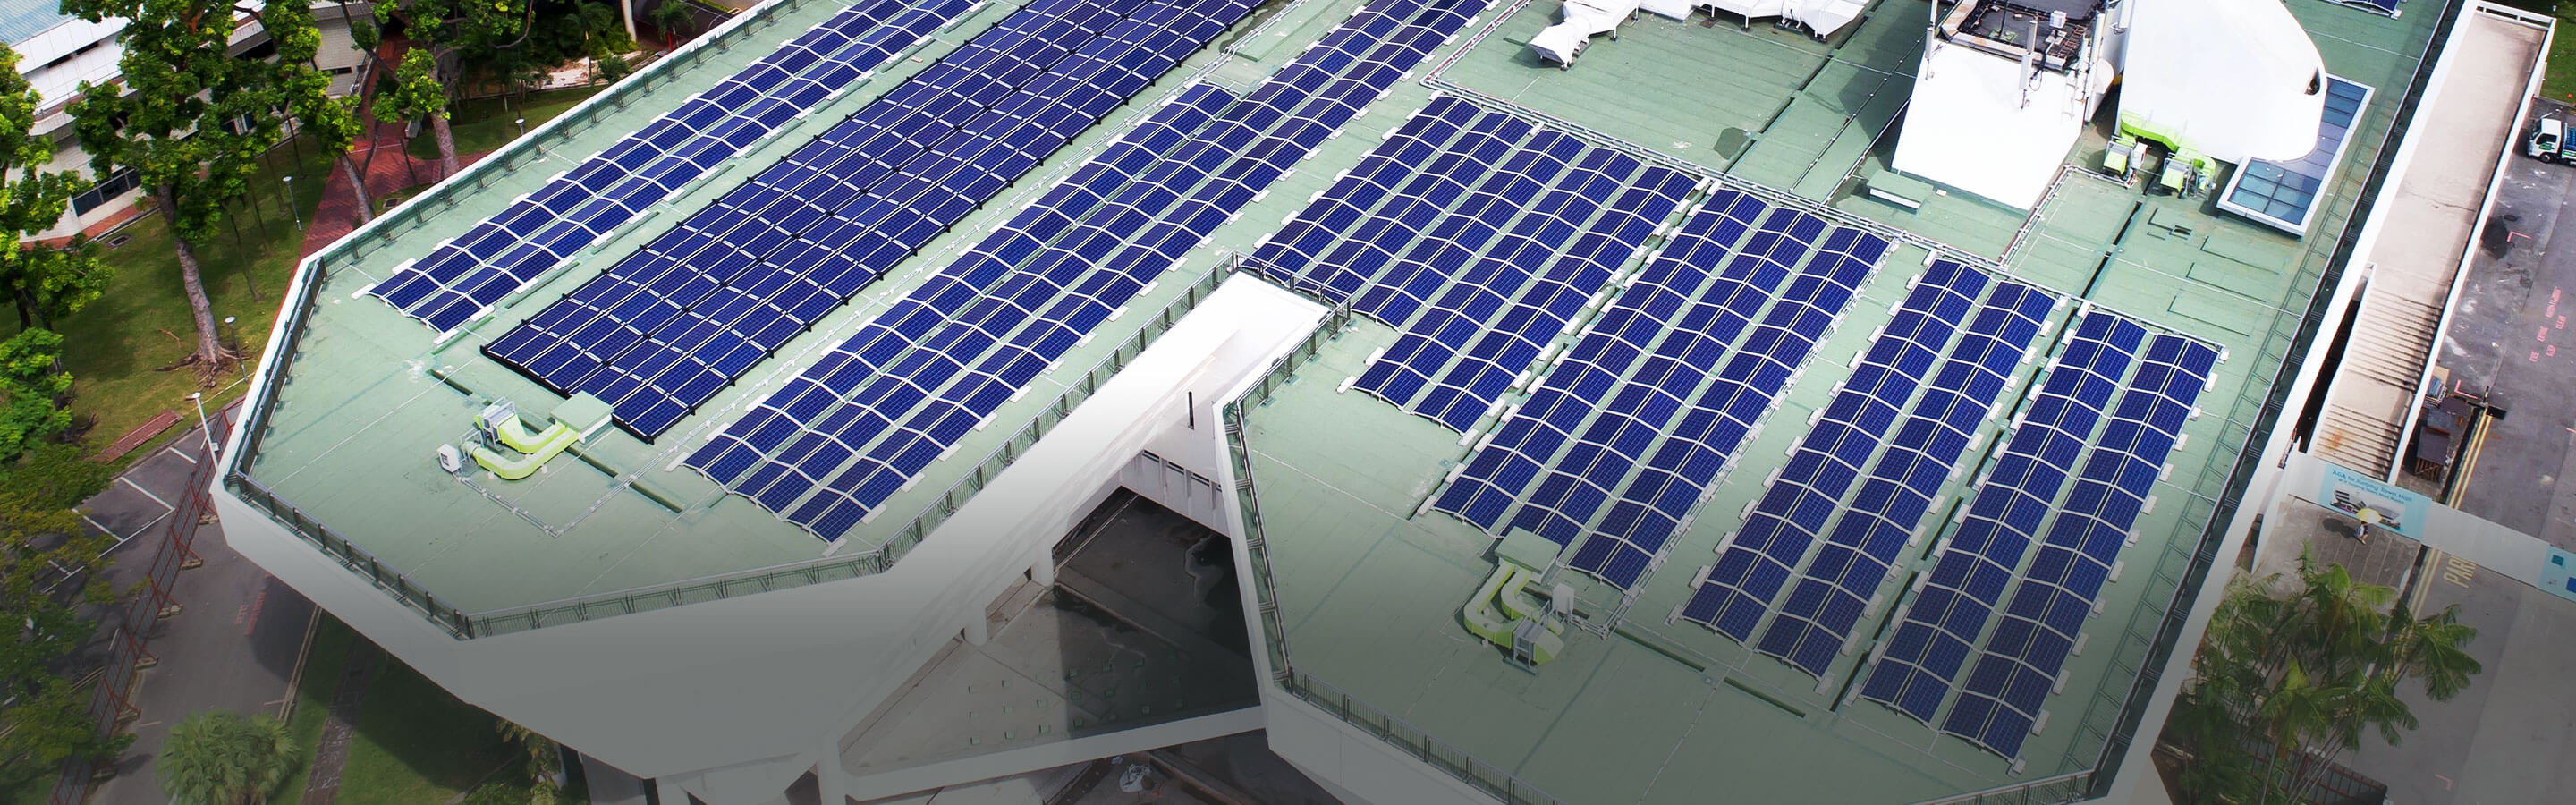 Solar panels generating solar energy on a roof of a green building